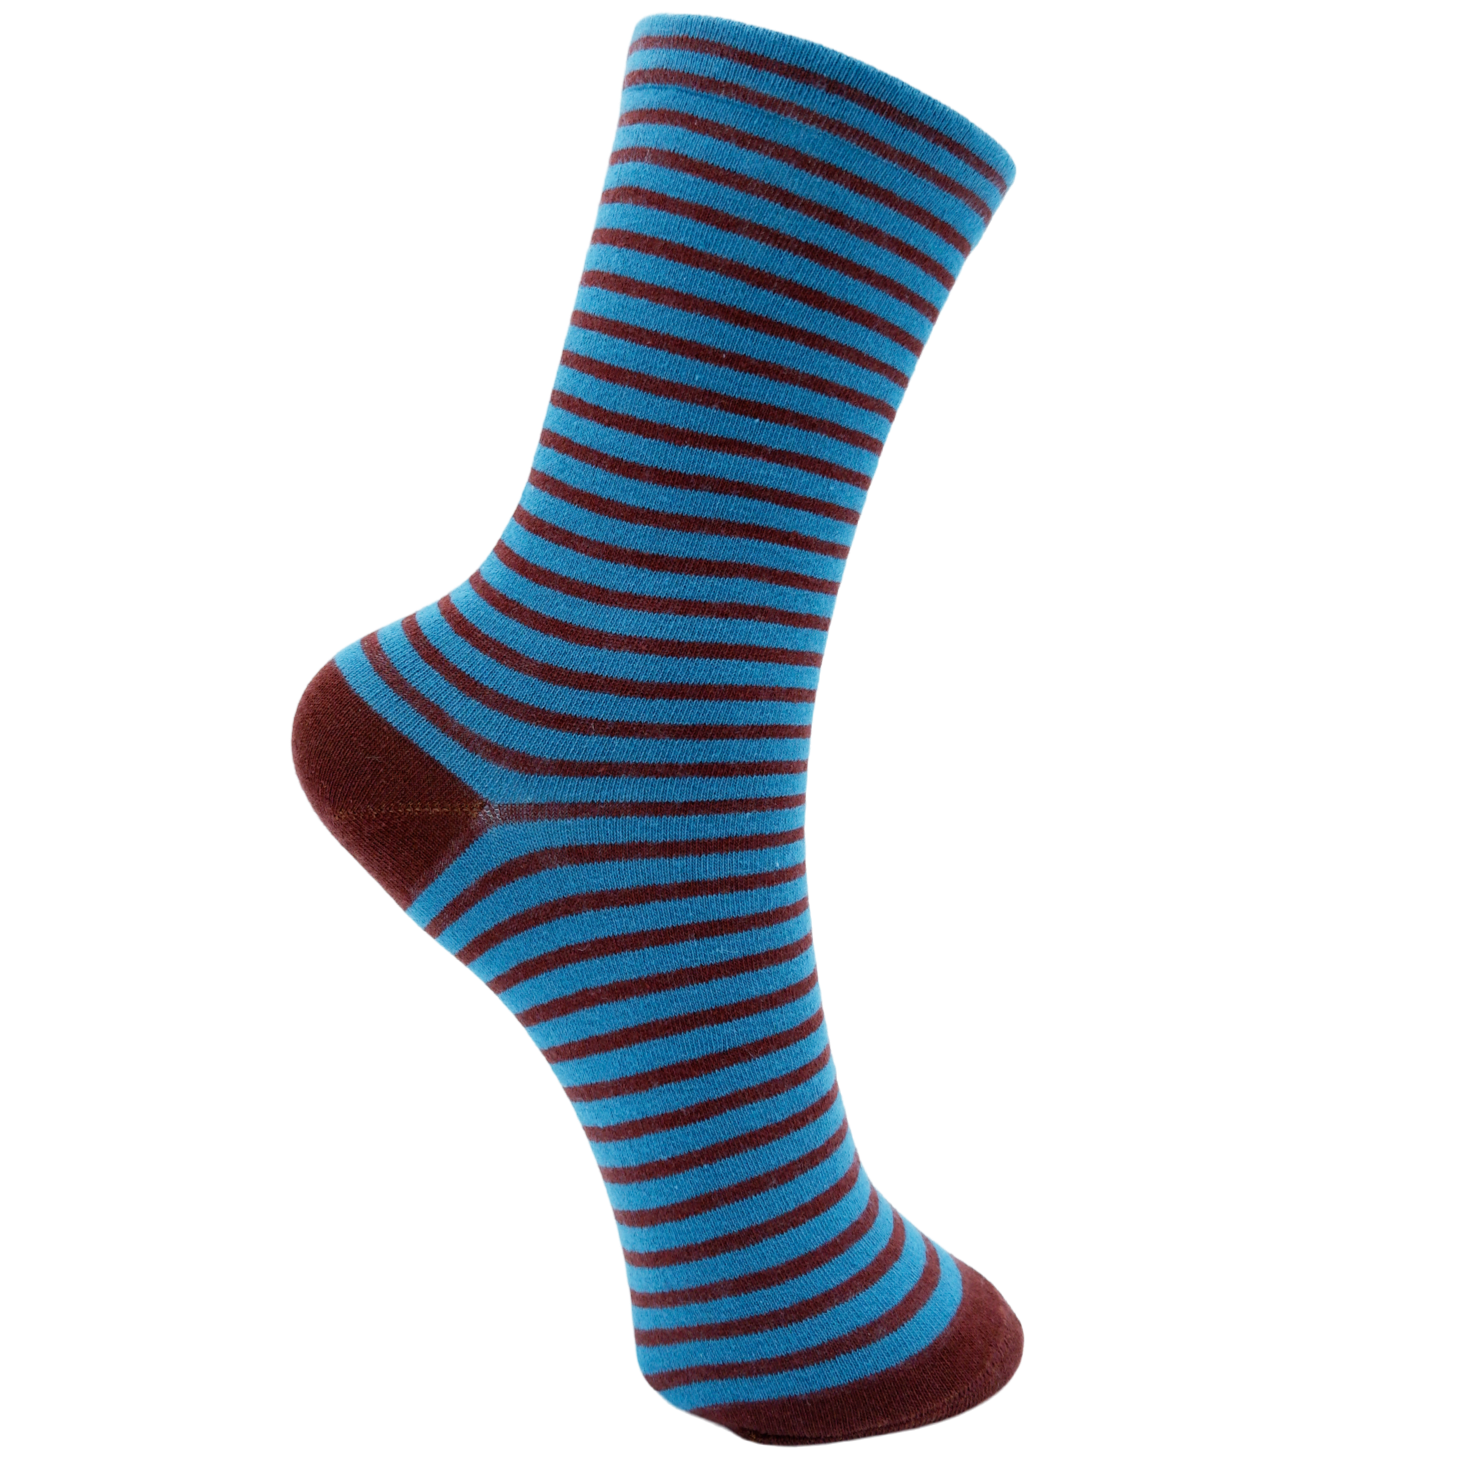 Blue/Red Striped Socks by Black Colour